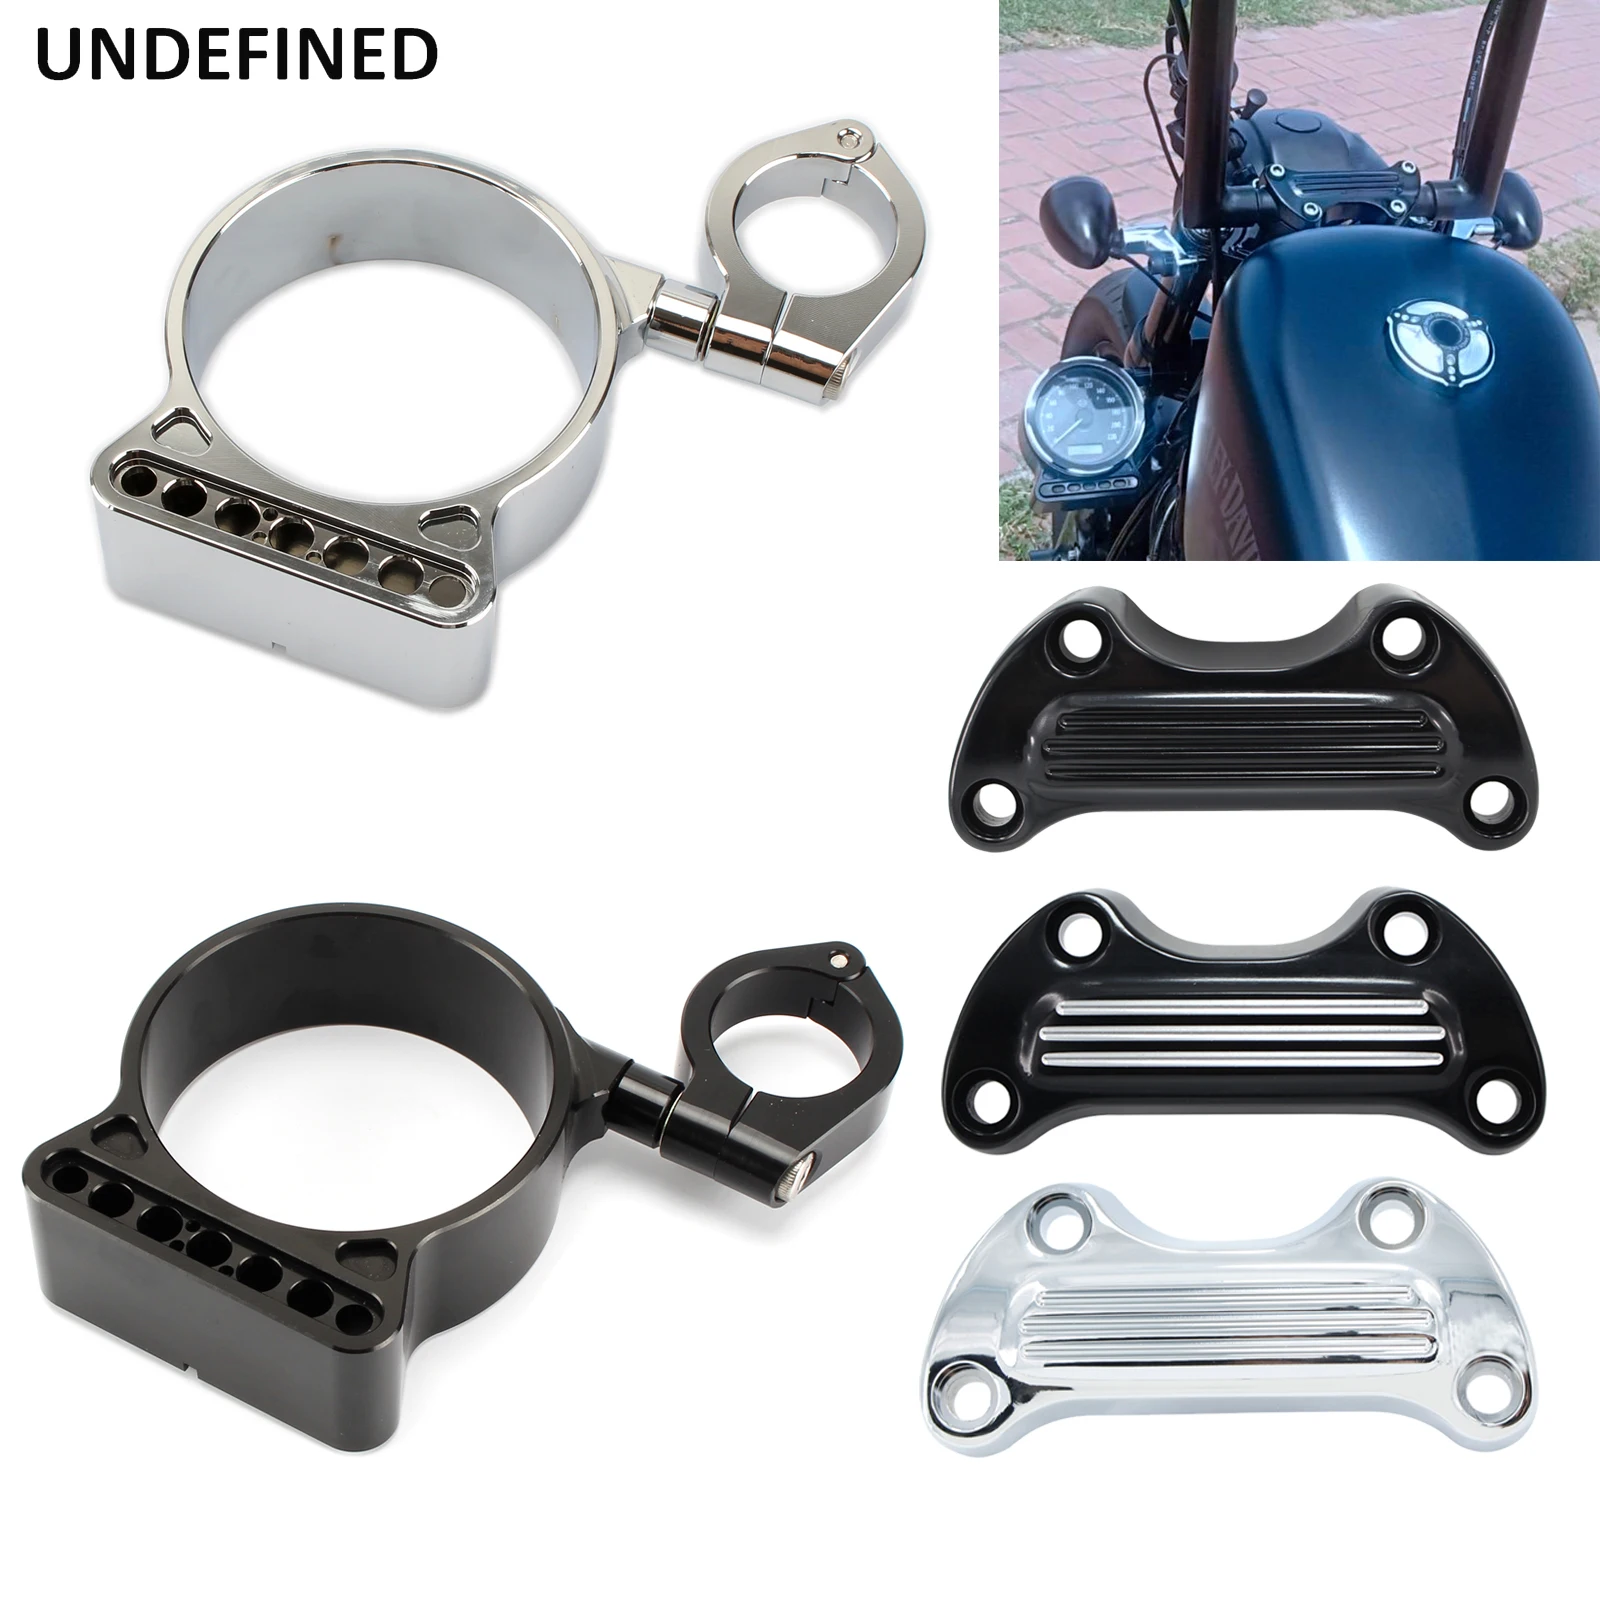 Motorcycle Instrument Speedometer Bracket Housing Side Mount Relocation Cover W/ Handlebar Top Clamp For Harley Sportster 883 XL